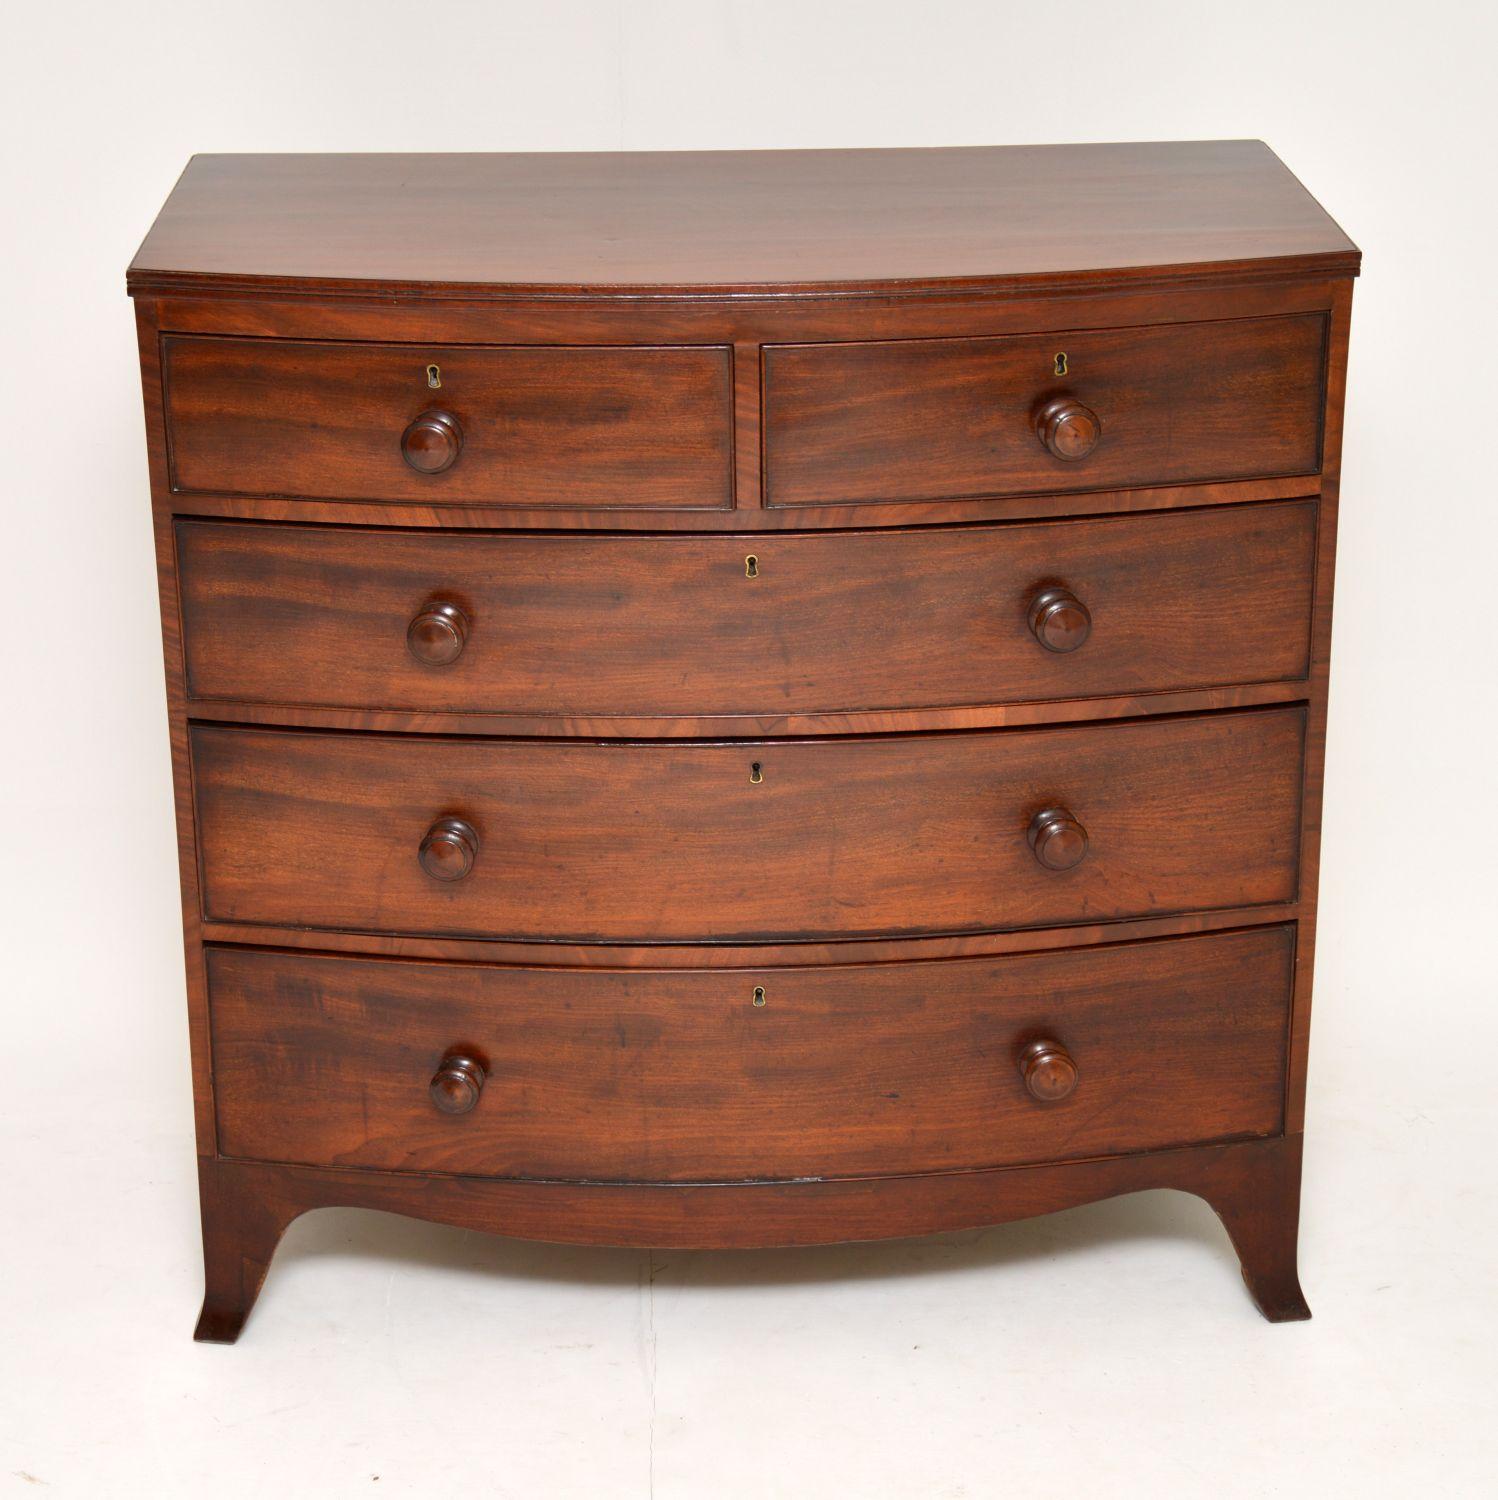 Antique George III mahogany bow fronted chest of drawers in excellent condition & with a lovely warm colour. The drawers are graduated in depth & have turned bun handles & locks. This chest sits on splayed legs with an apron shaped front. It dates